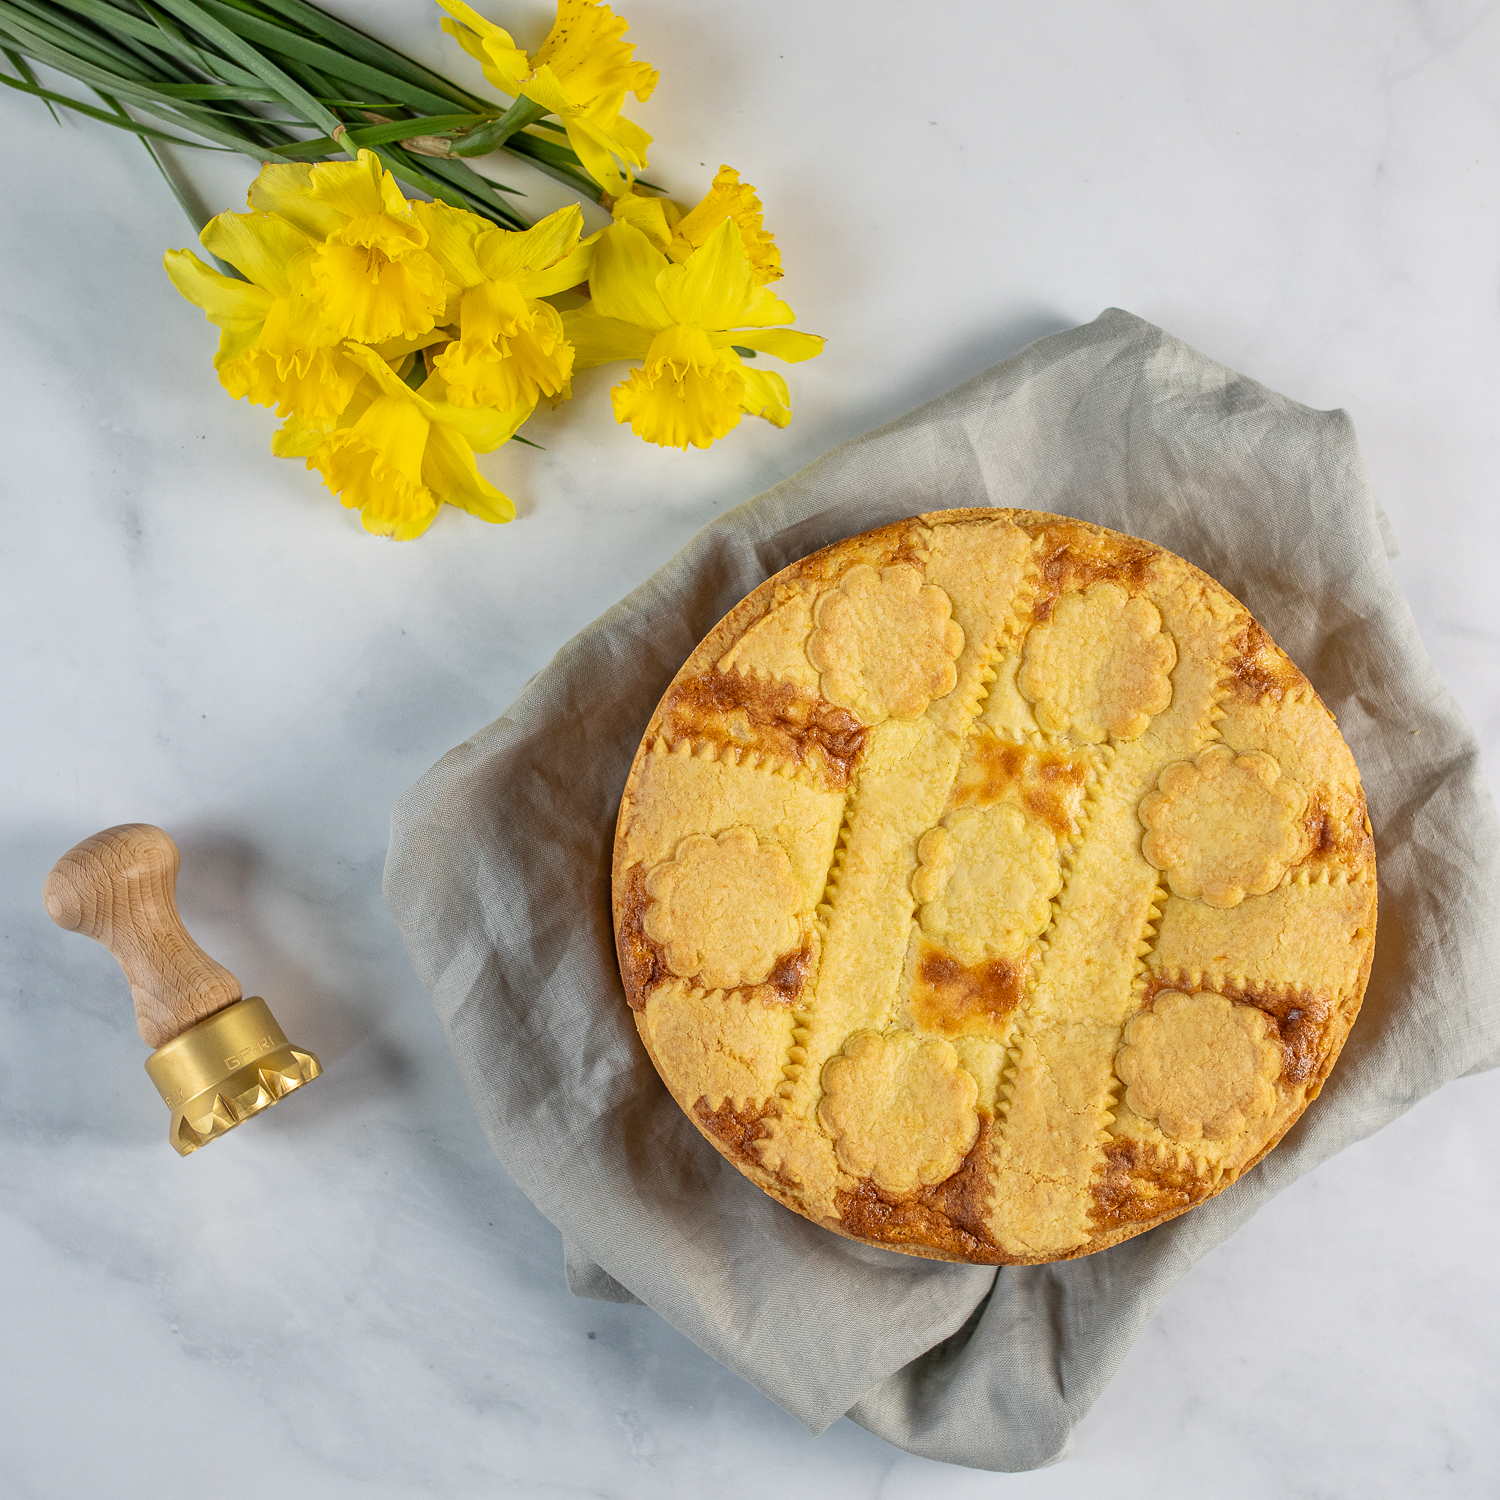 Pastiera di Riso, Italian Easter rice pie with flower topping